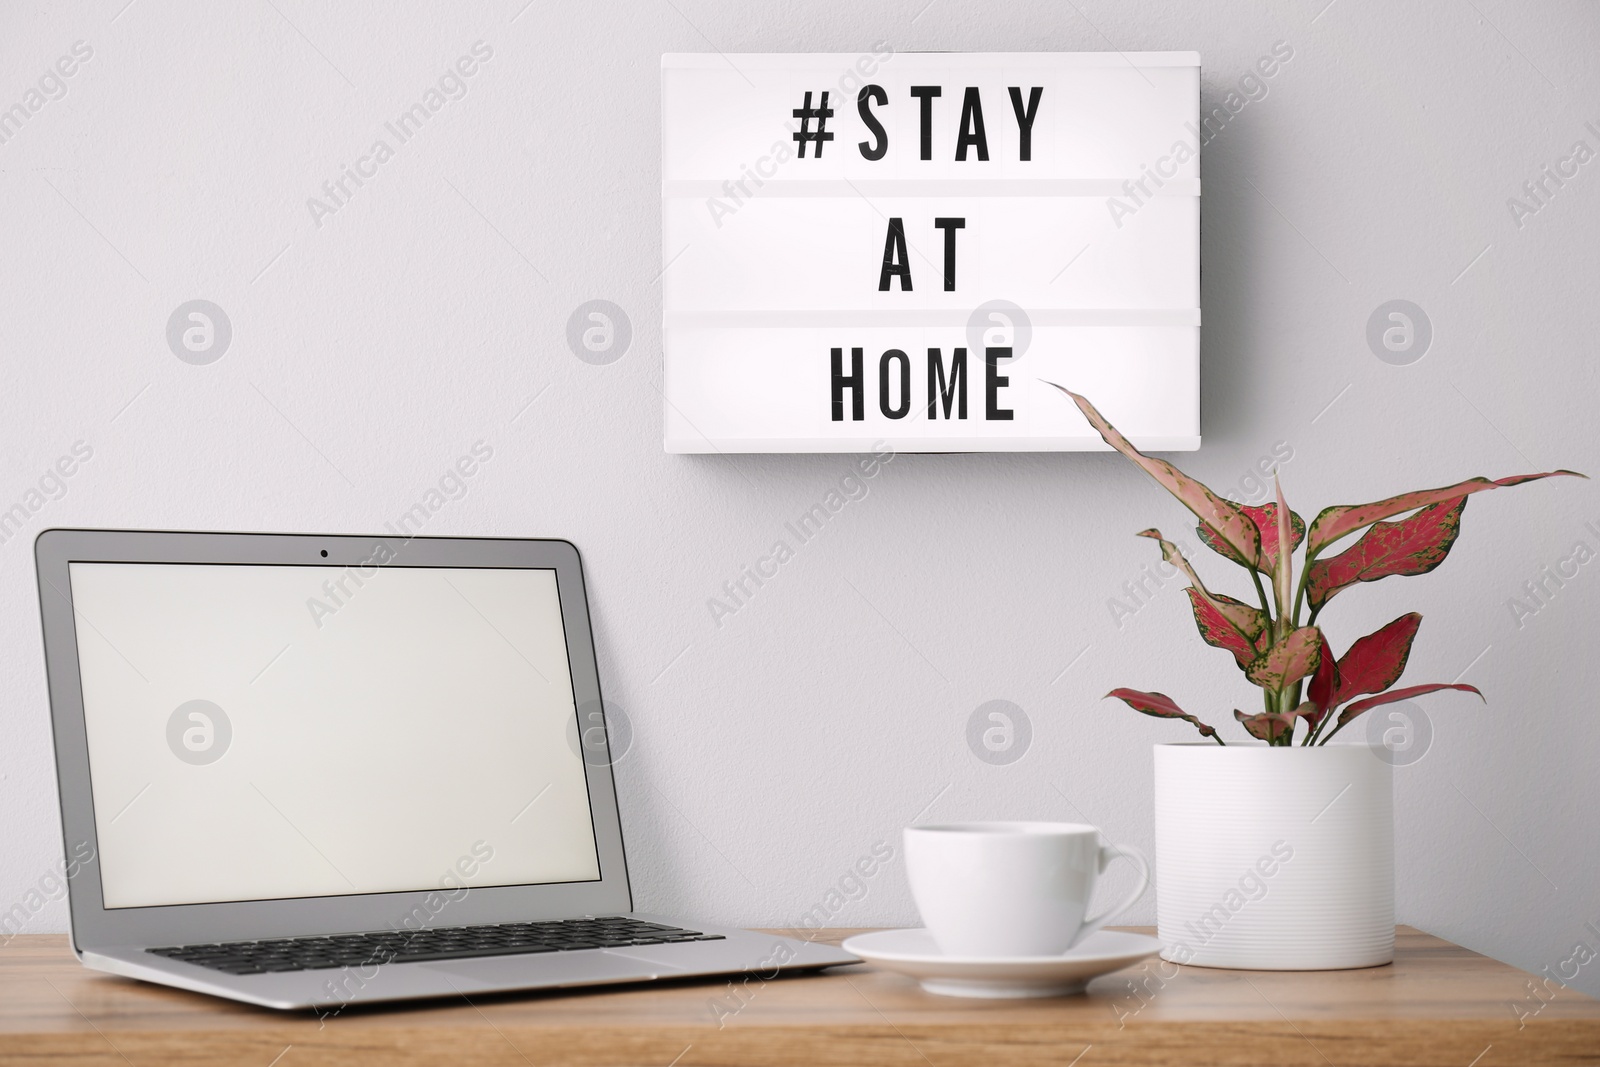 Photo of Laptop, cup and lightbox with hashtag STAY AT HOME indoors. Message to promote self-isolation during COVID‑19 pandemic